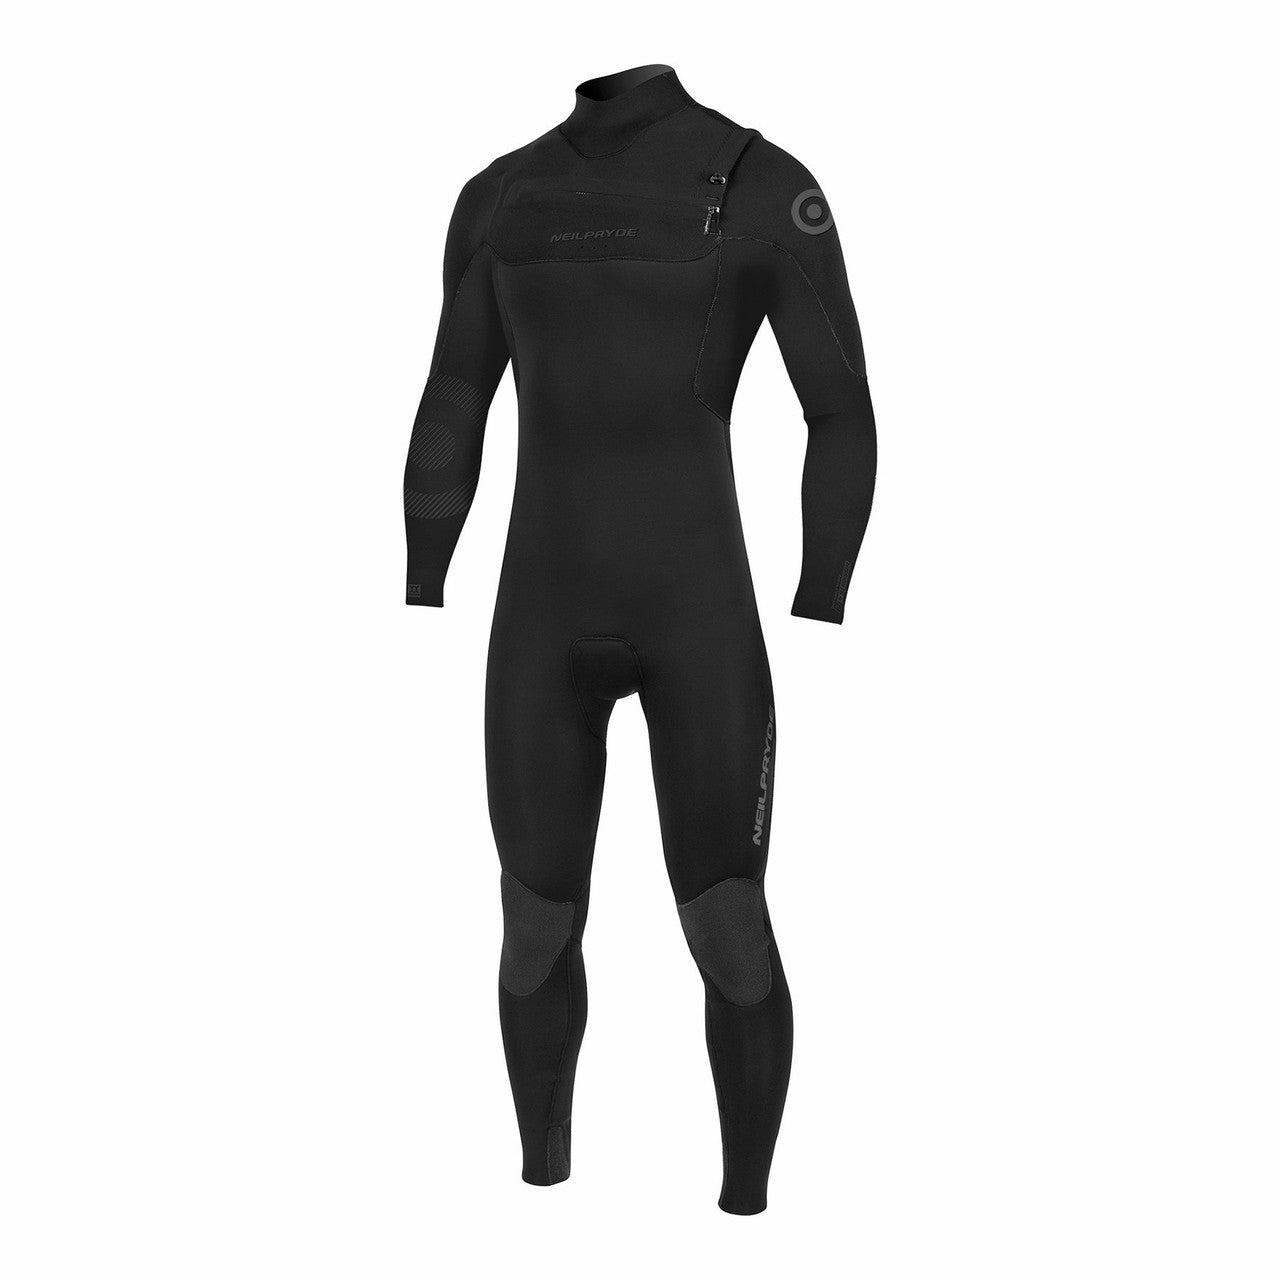 Neil Pryde/NP Mission Front Zip 3/2 Wetsuit 50% off